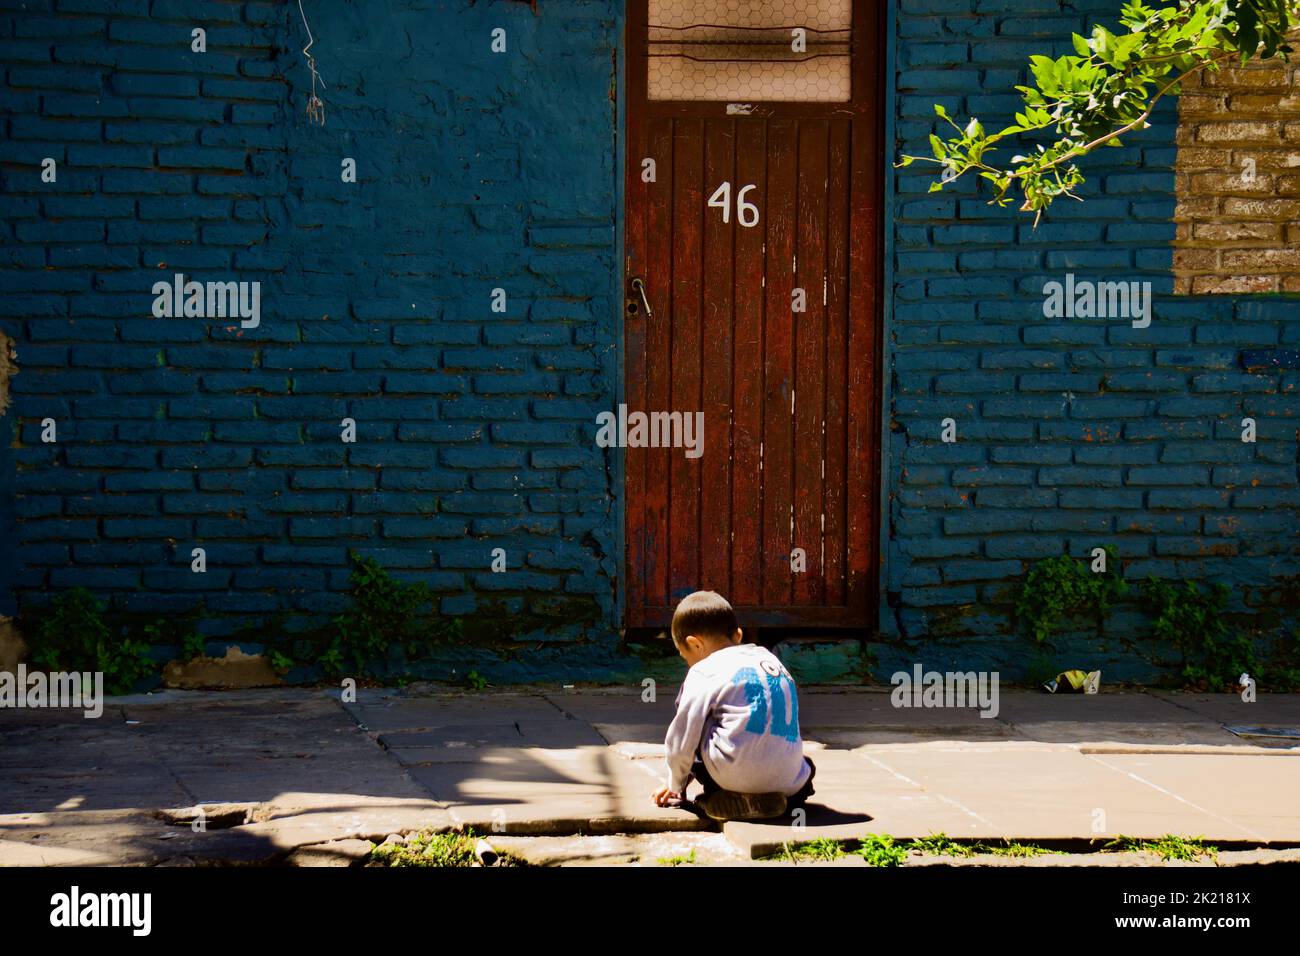 A view of a child playing in the garden at the wooden door with the number 46 Stock Photo